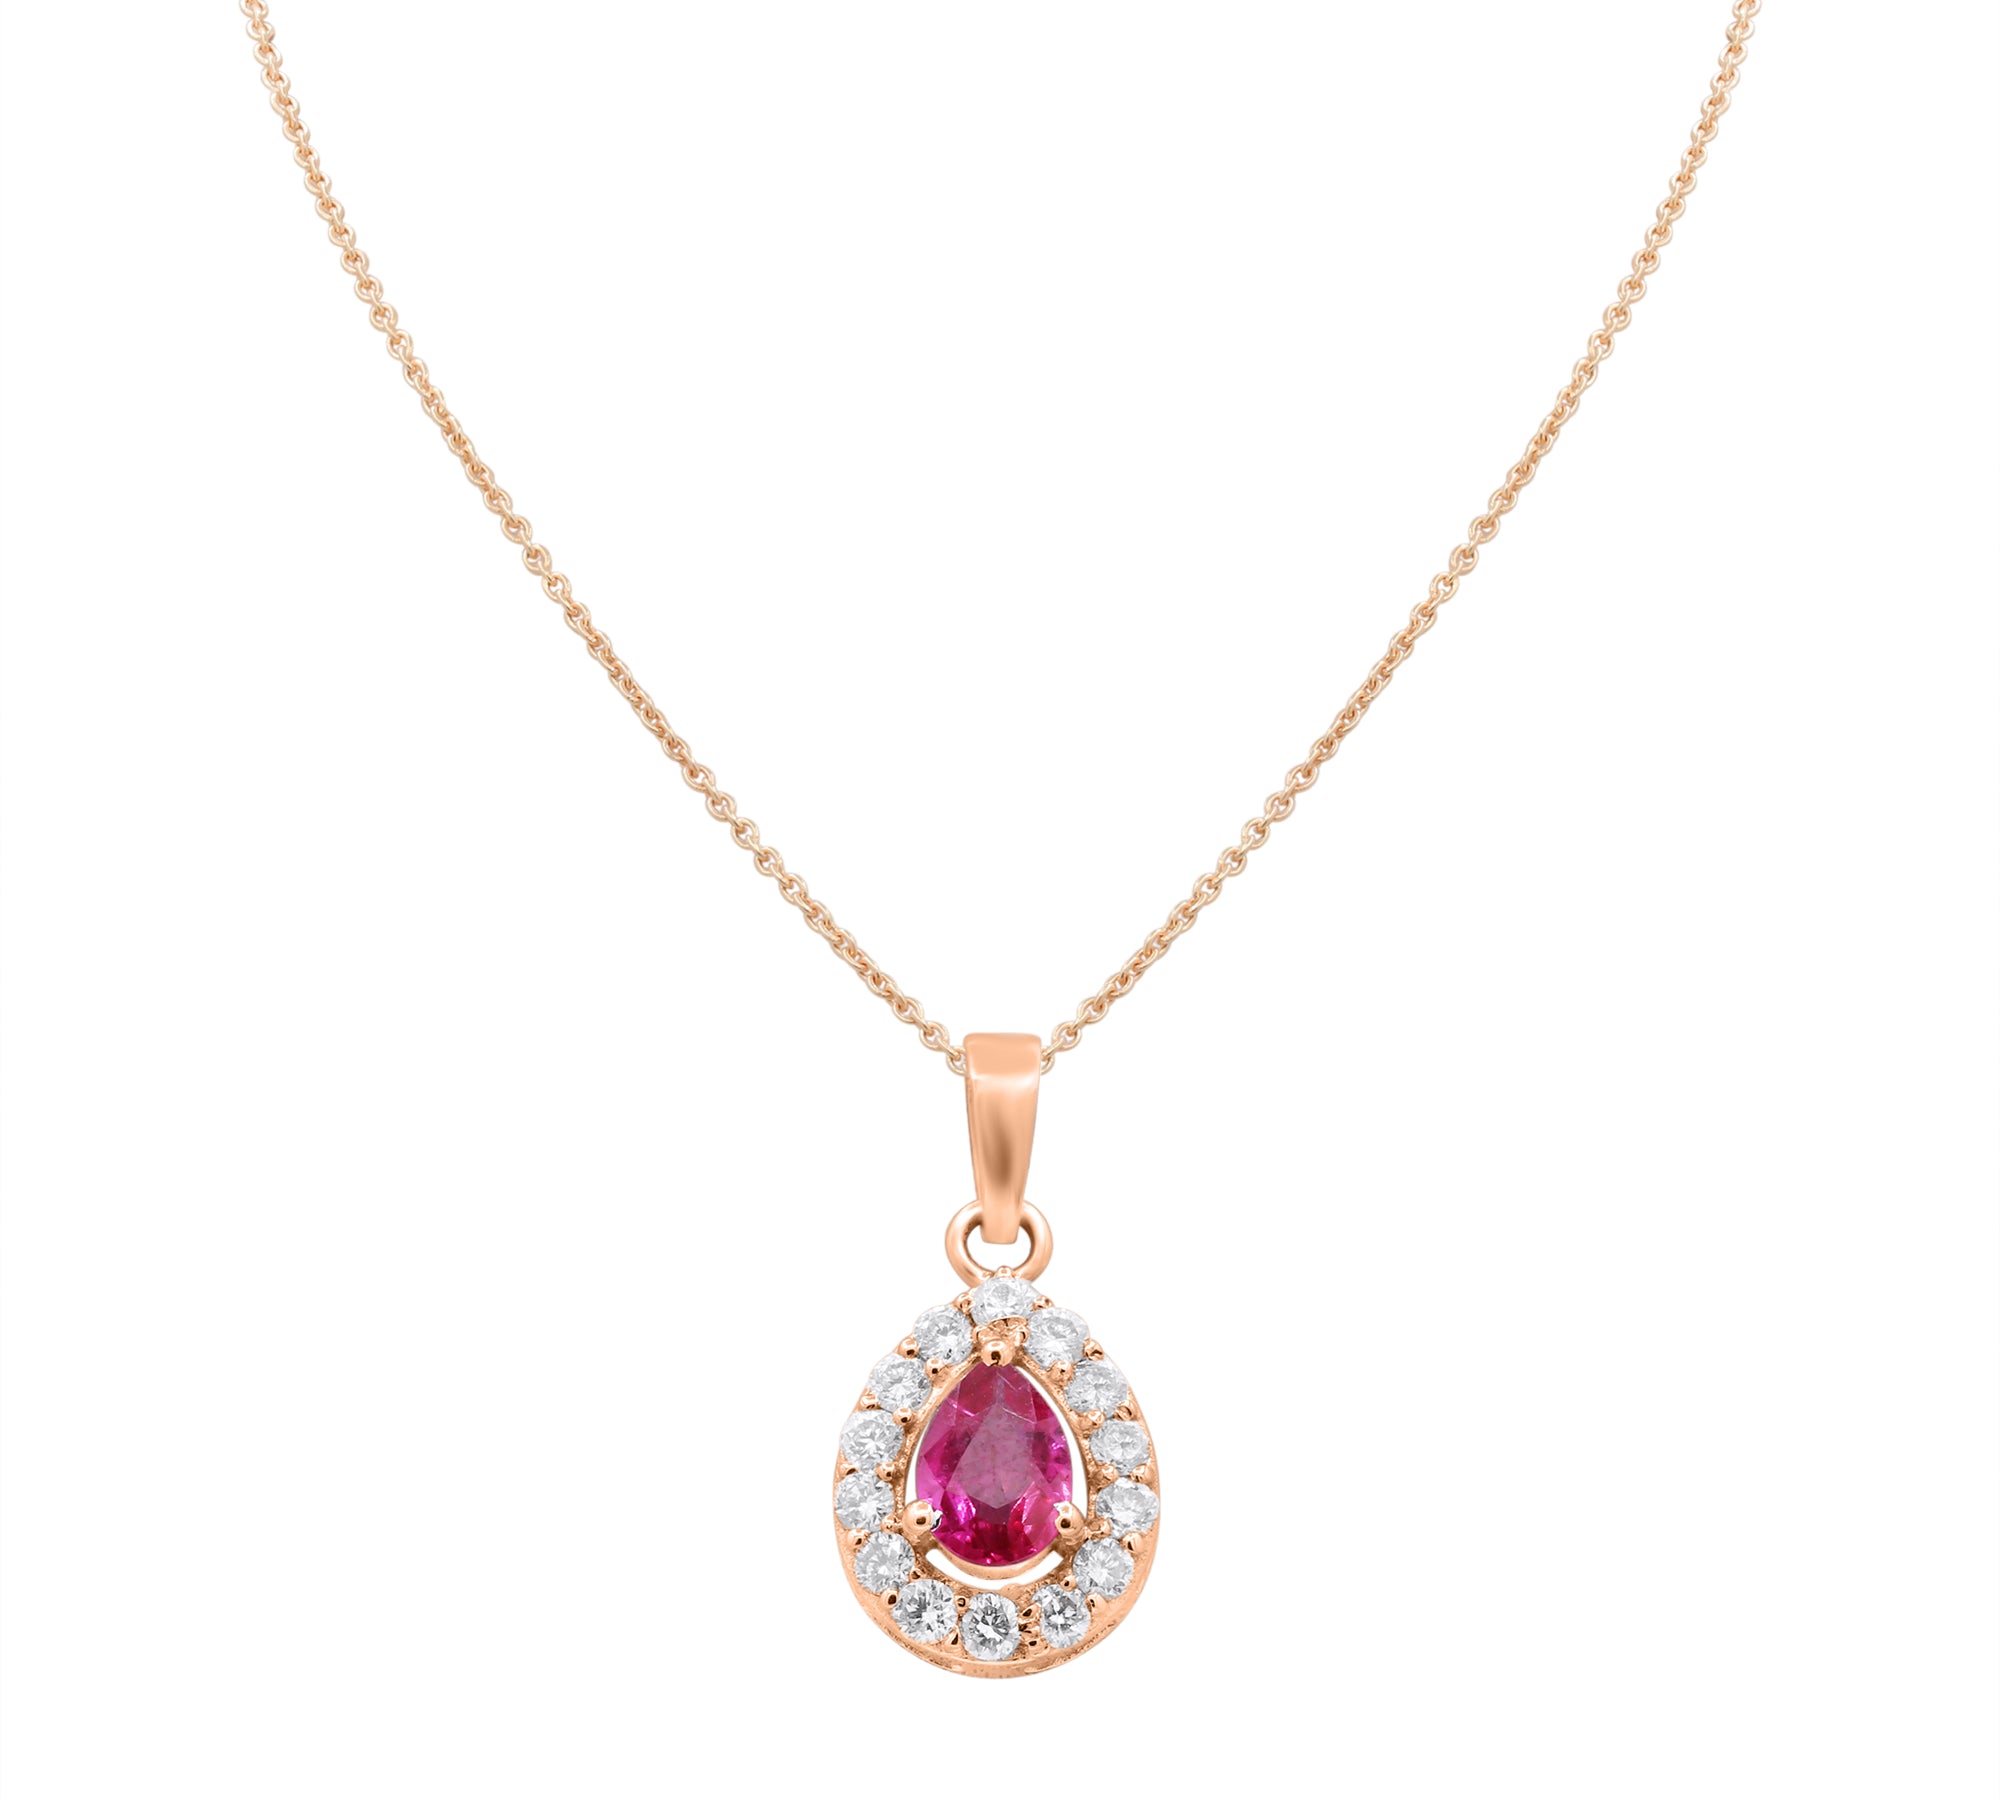 Natural Ruby Pear Cut Gemstone With Diamond 14k White Gold Pendant With Chain